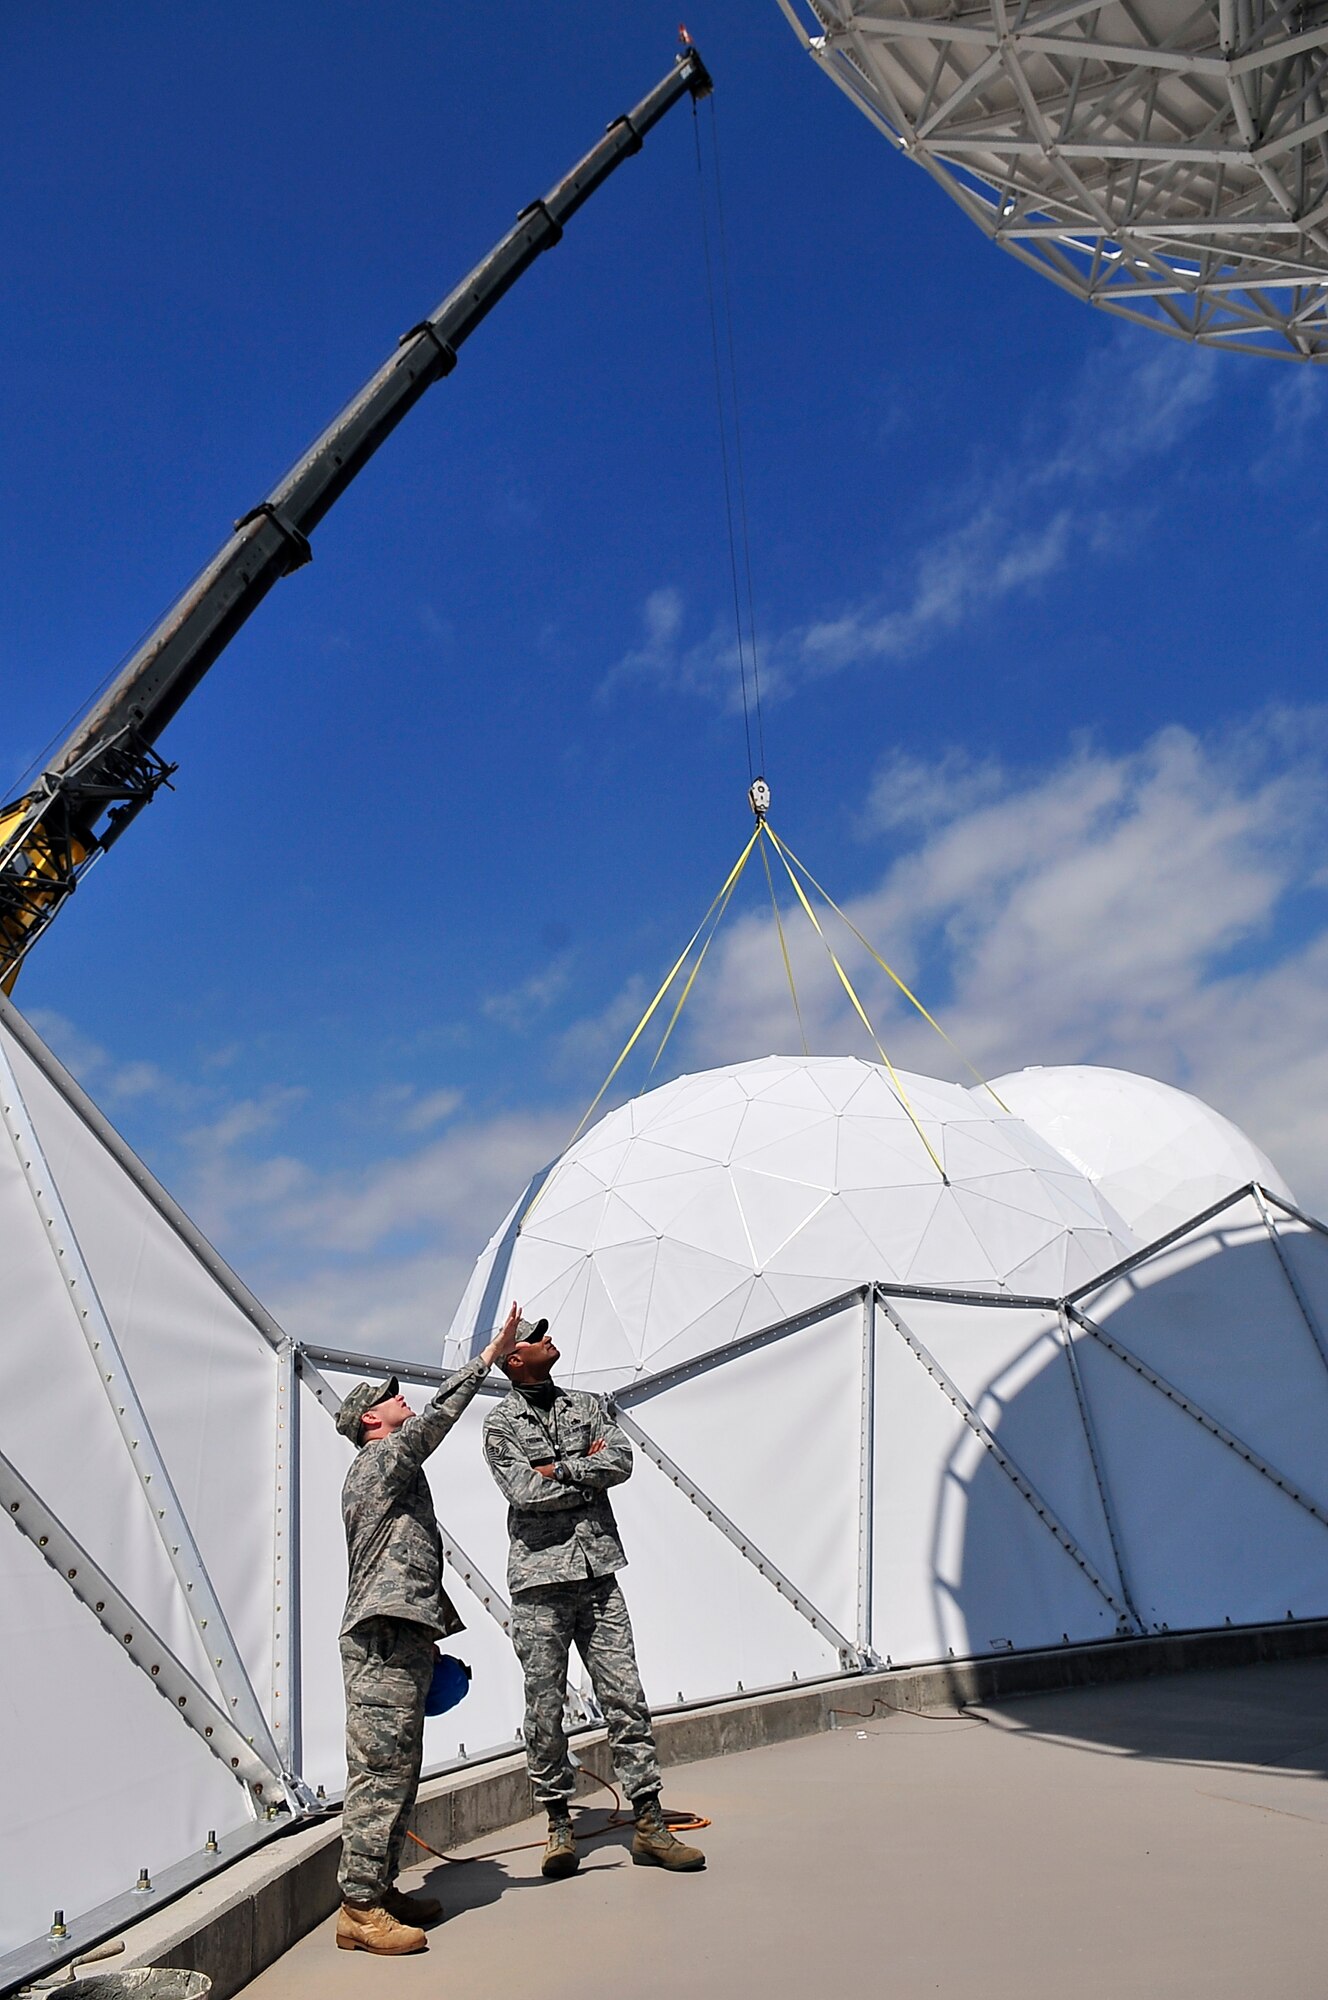 BUCKLEY AIR FORCE BASE, Colo. -- Tech. Sgt. Robert Shaw, left, and Senior Master Sgt. Michael Freeman, both of the 460th Space Communications Squadron, do a final site survey before the installation of a radome enclosure here June 9. The enclosure protects Buckley assets from ice, snow and hail during winter weather. (U.S. Air Force photo by Staff Sgt. Kathrine McDowell)